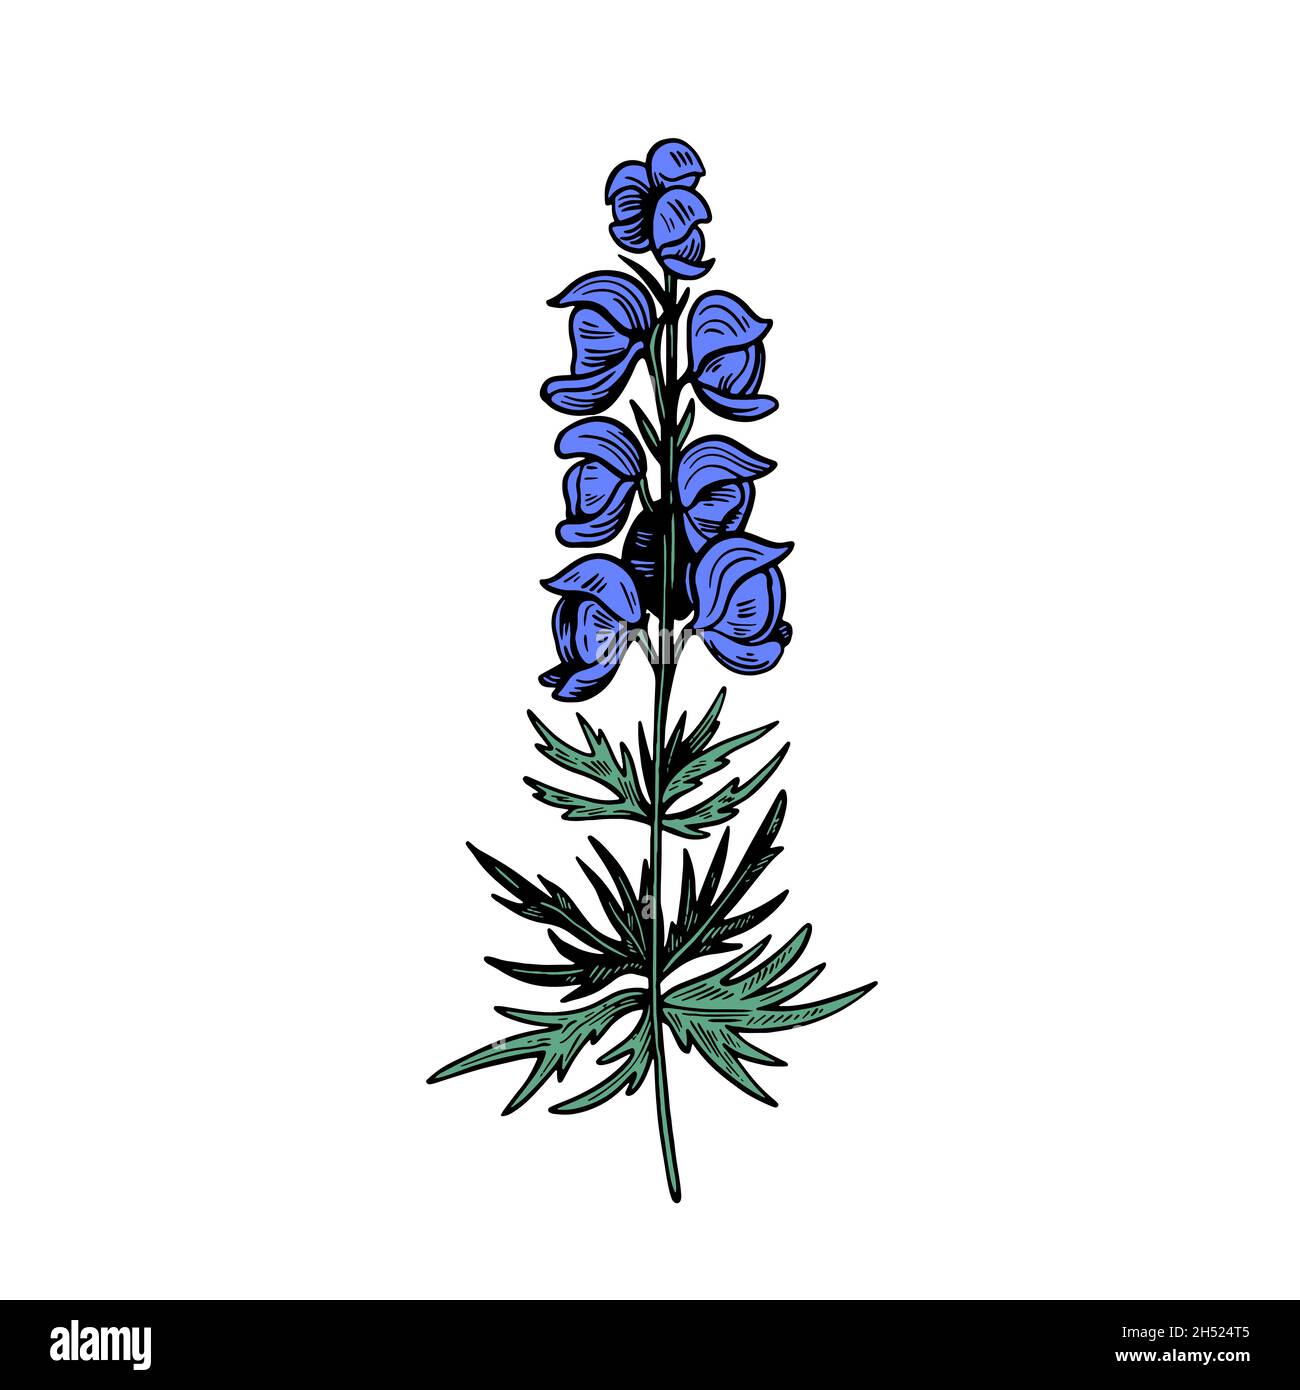 Poisonous plant Aconitum isolated on white background. Hand drawn vector illustration in engraving style. Stock Vector